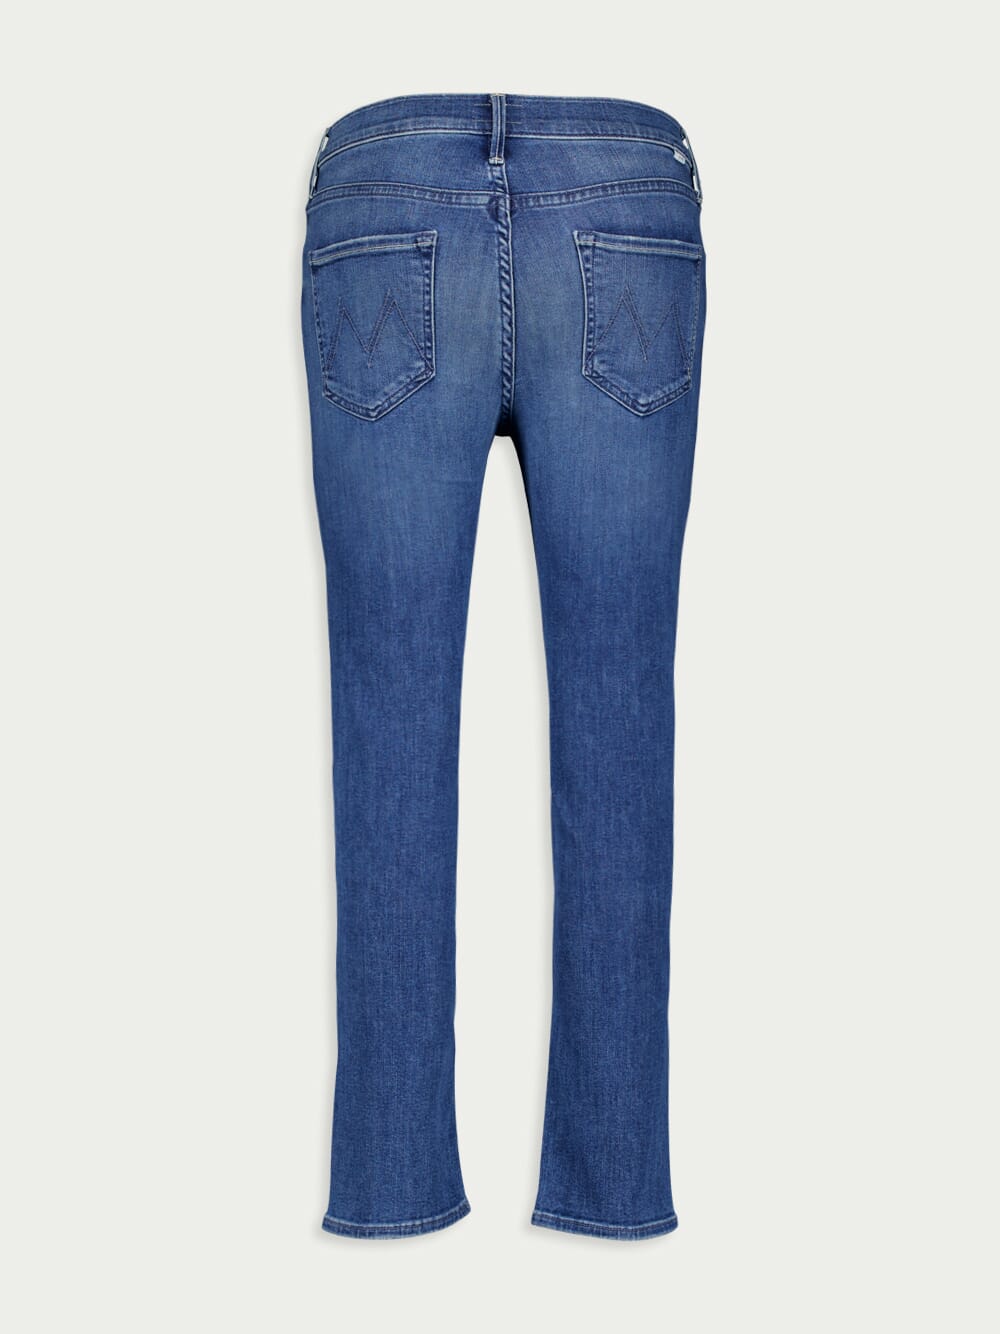 MotherMid-Rise Skinny Ankle-Crop Jeans at Fashion Clinic